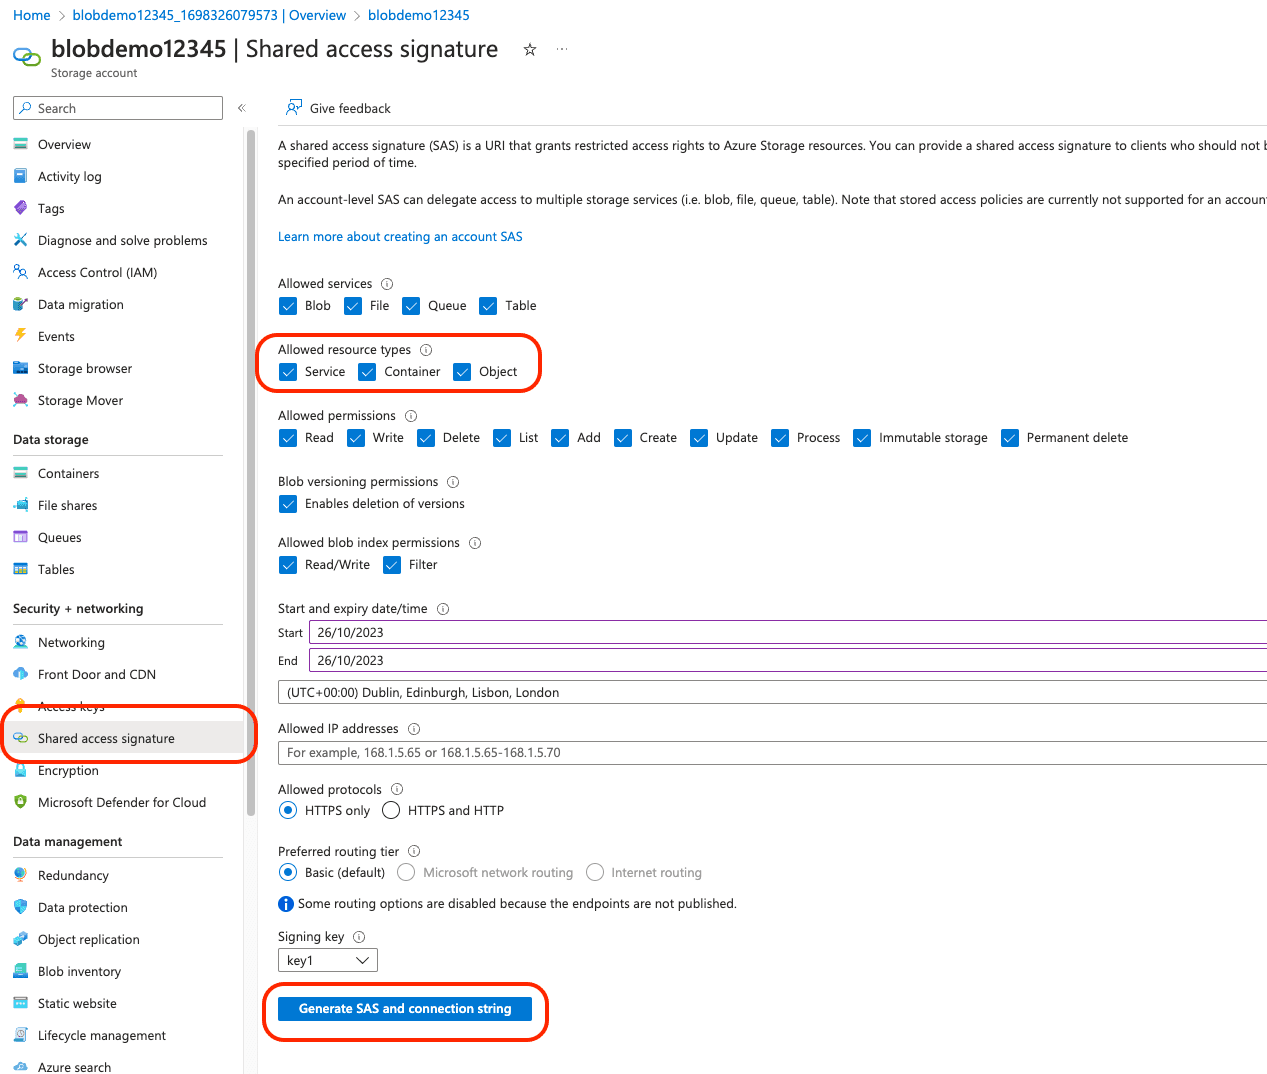 Microsoft portal storage account screen displaying the shared access signature page and where to locate the generate SAS and connection string